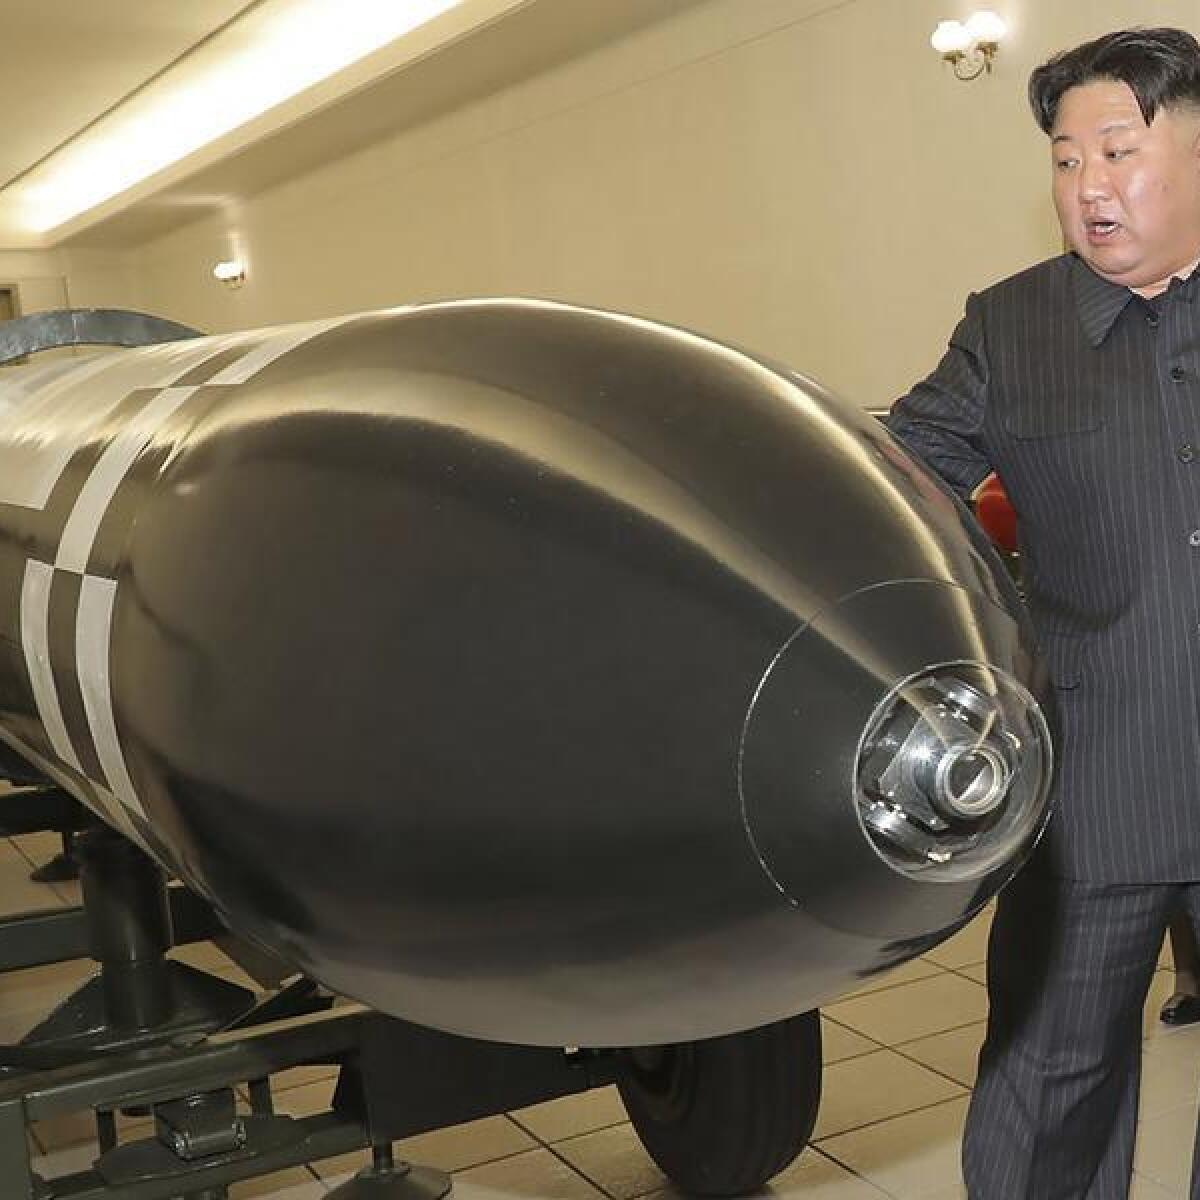 North Korean leader Kim Jong Un with missile.